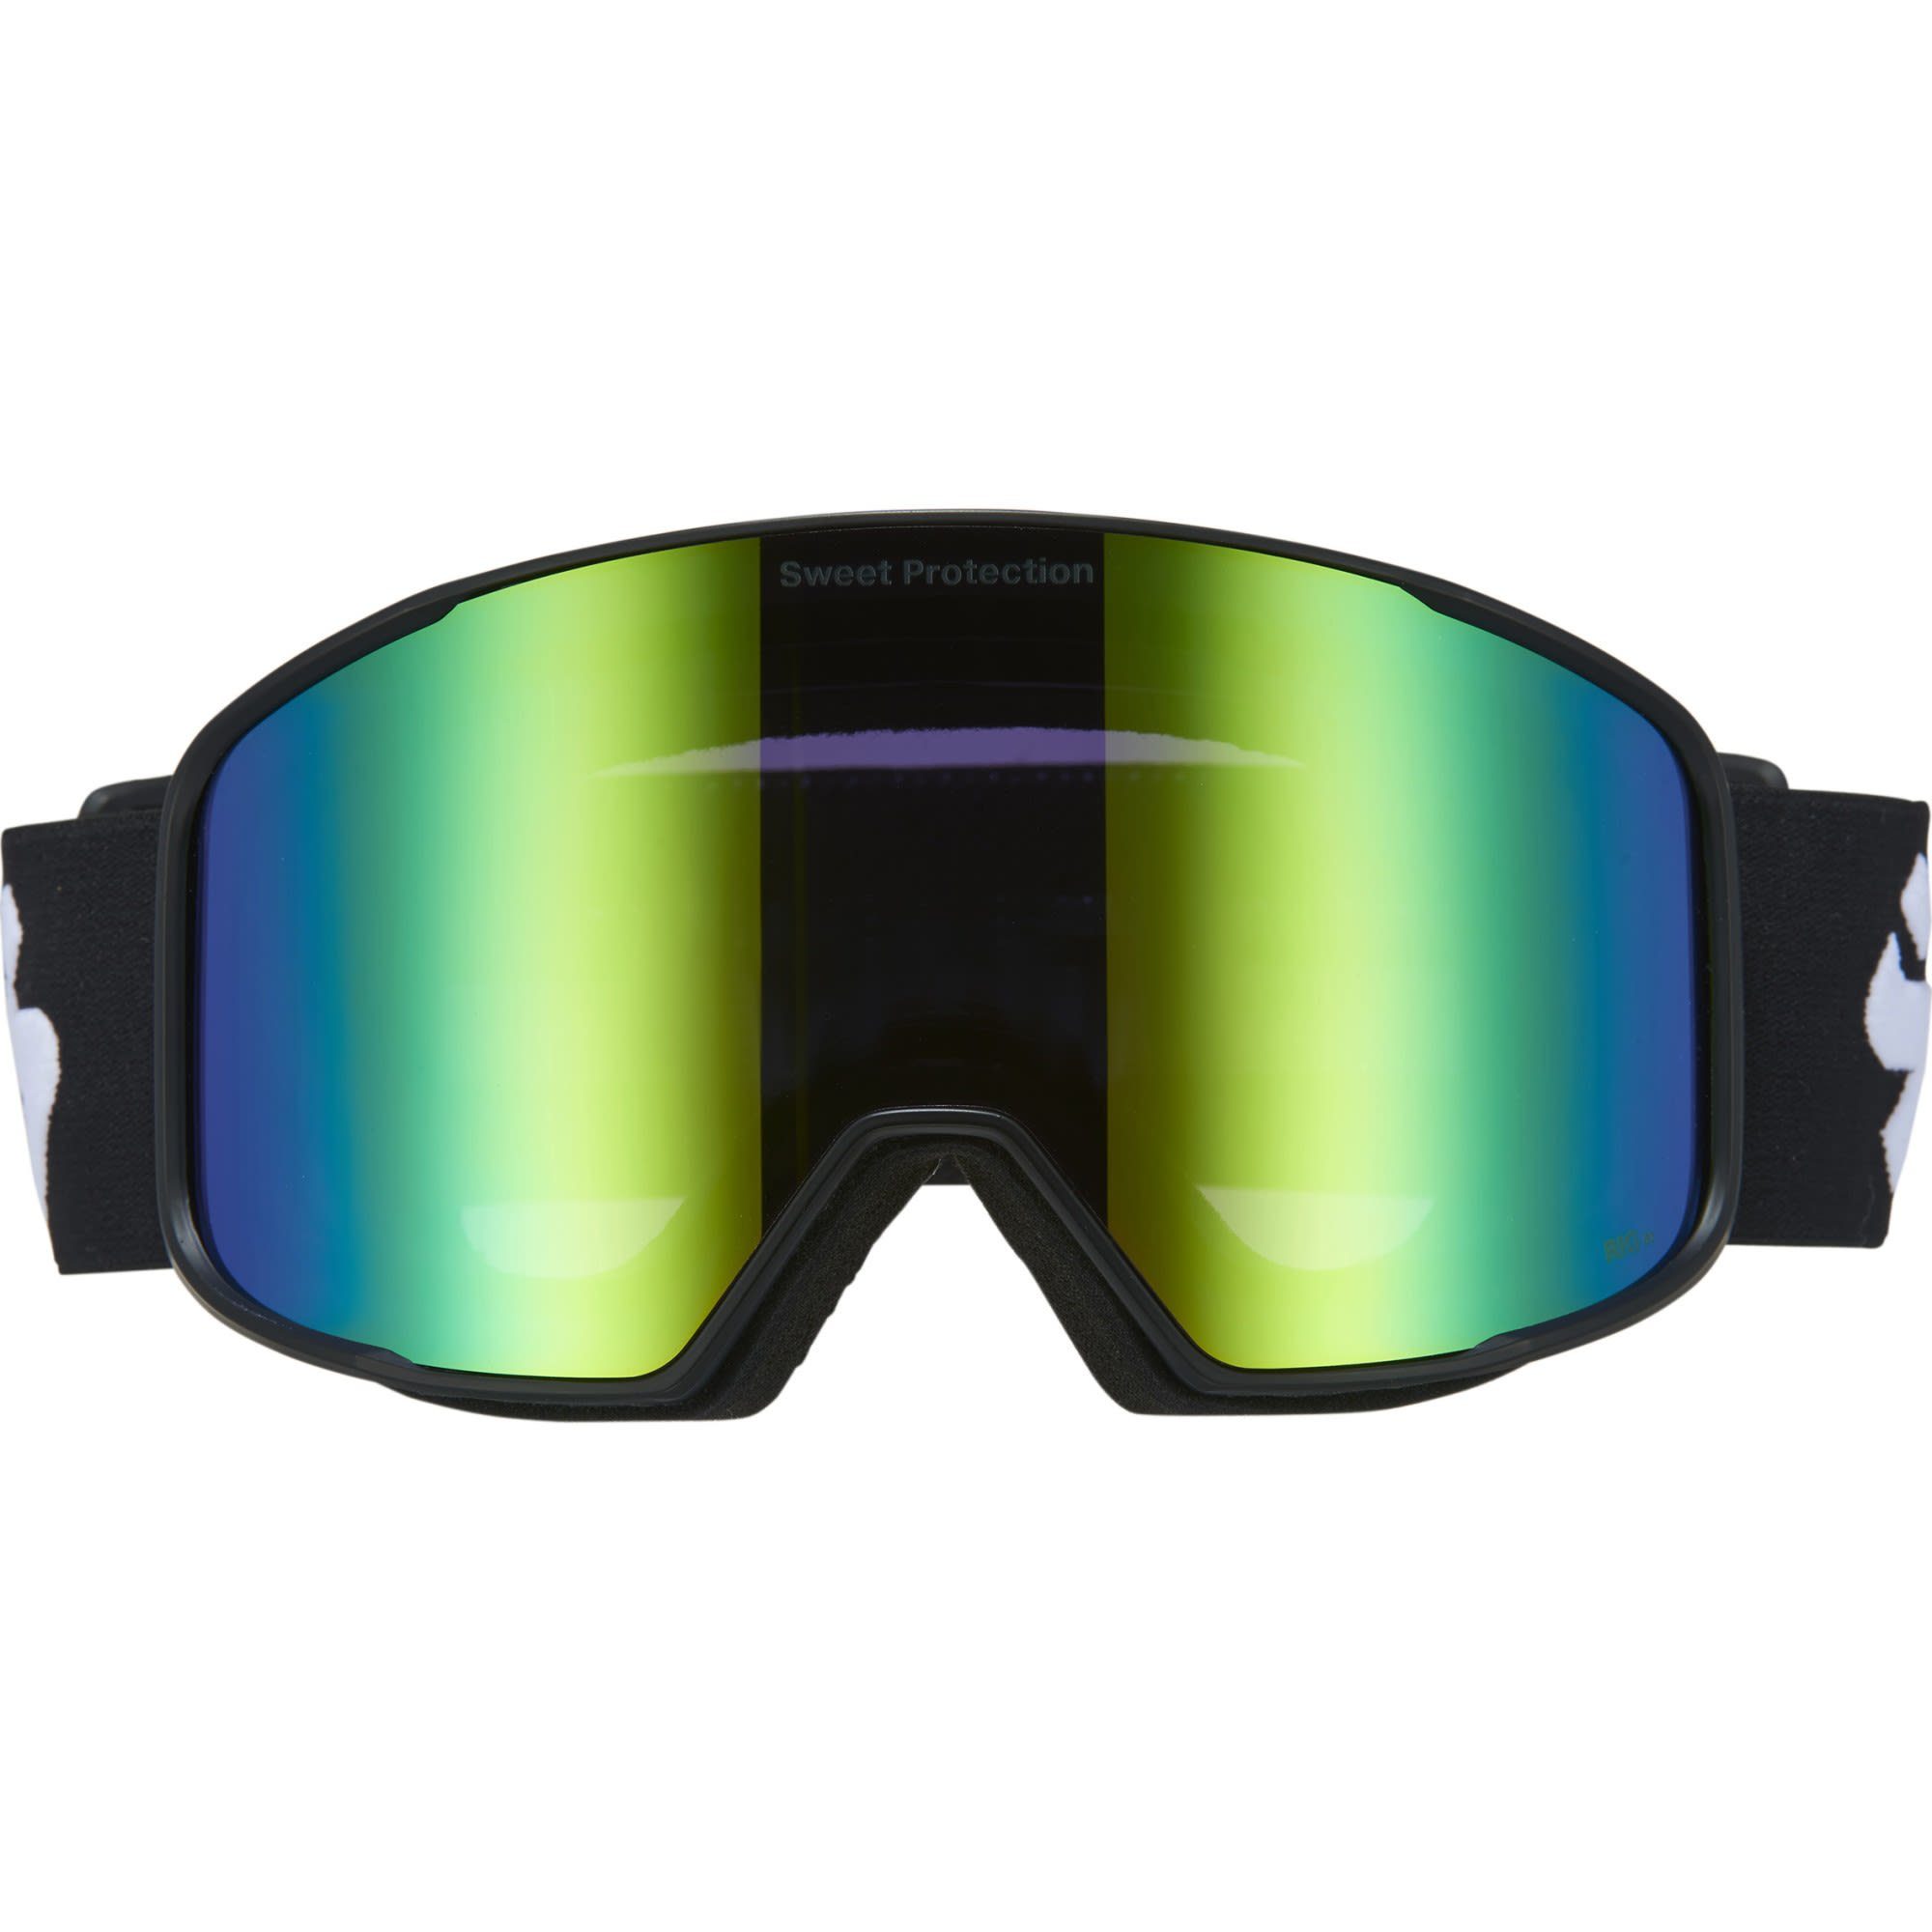 Sweet Protection Skibrille Sweet Protection Boondock Rig Reflect Lens RIG Emerald